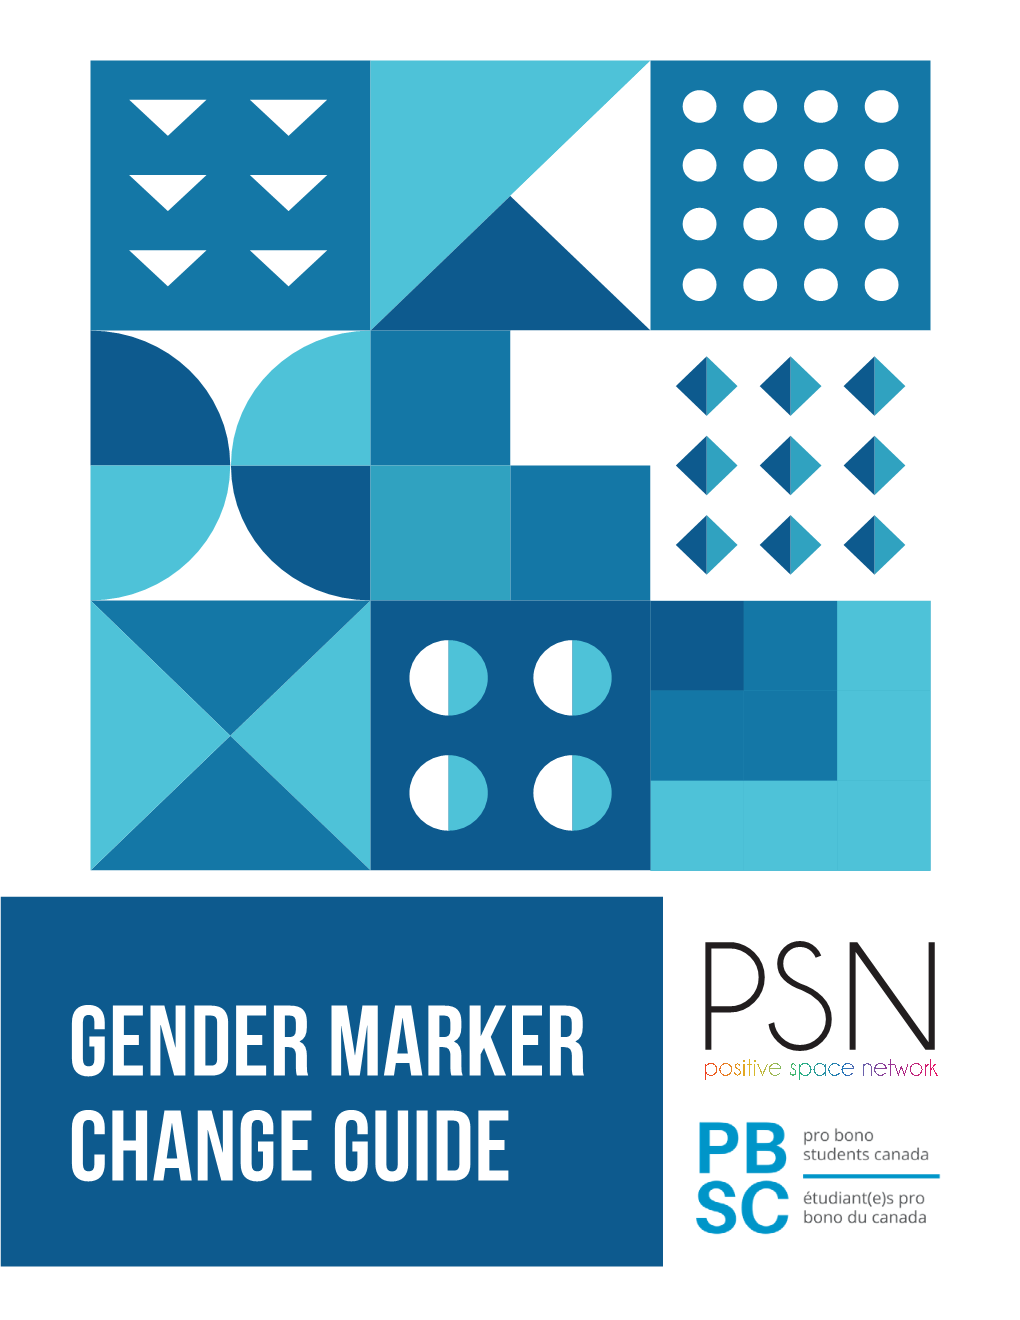 GENDER MARKER CHANGE GUIDE This Document Does Not Contain Legal Advice